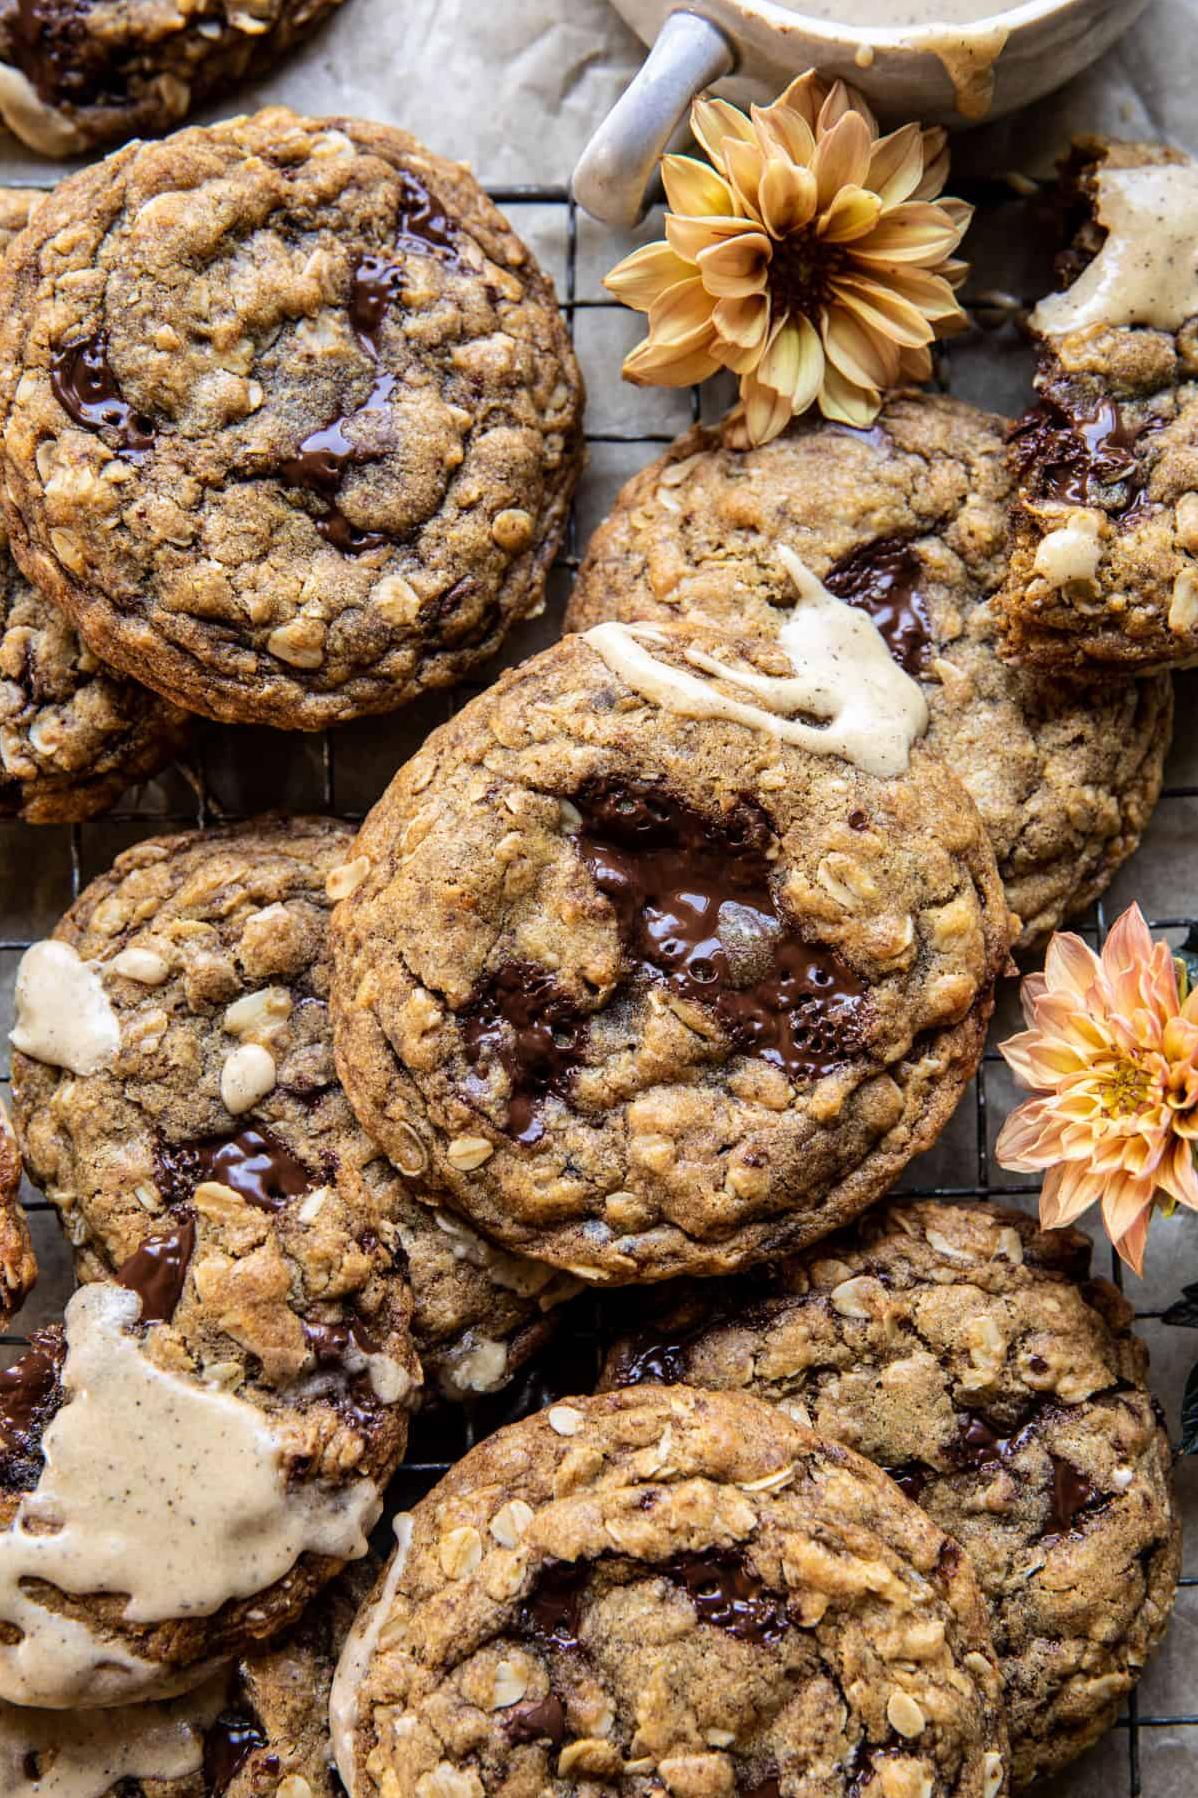  These cookies are chewy and hearty with the addition of oats and coffee.